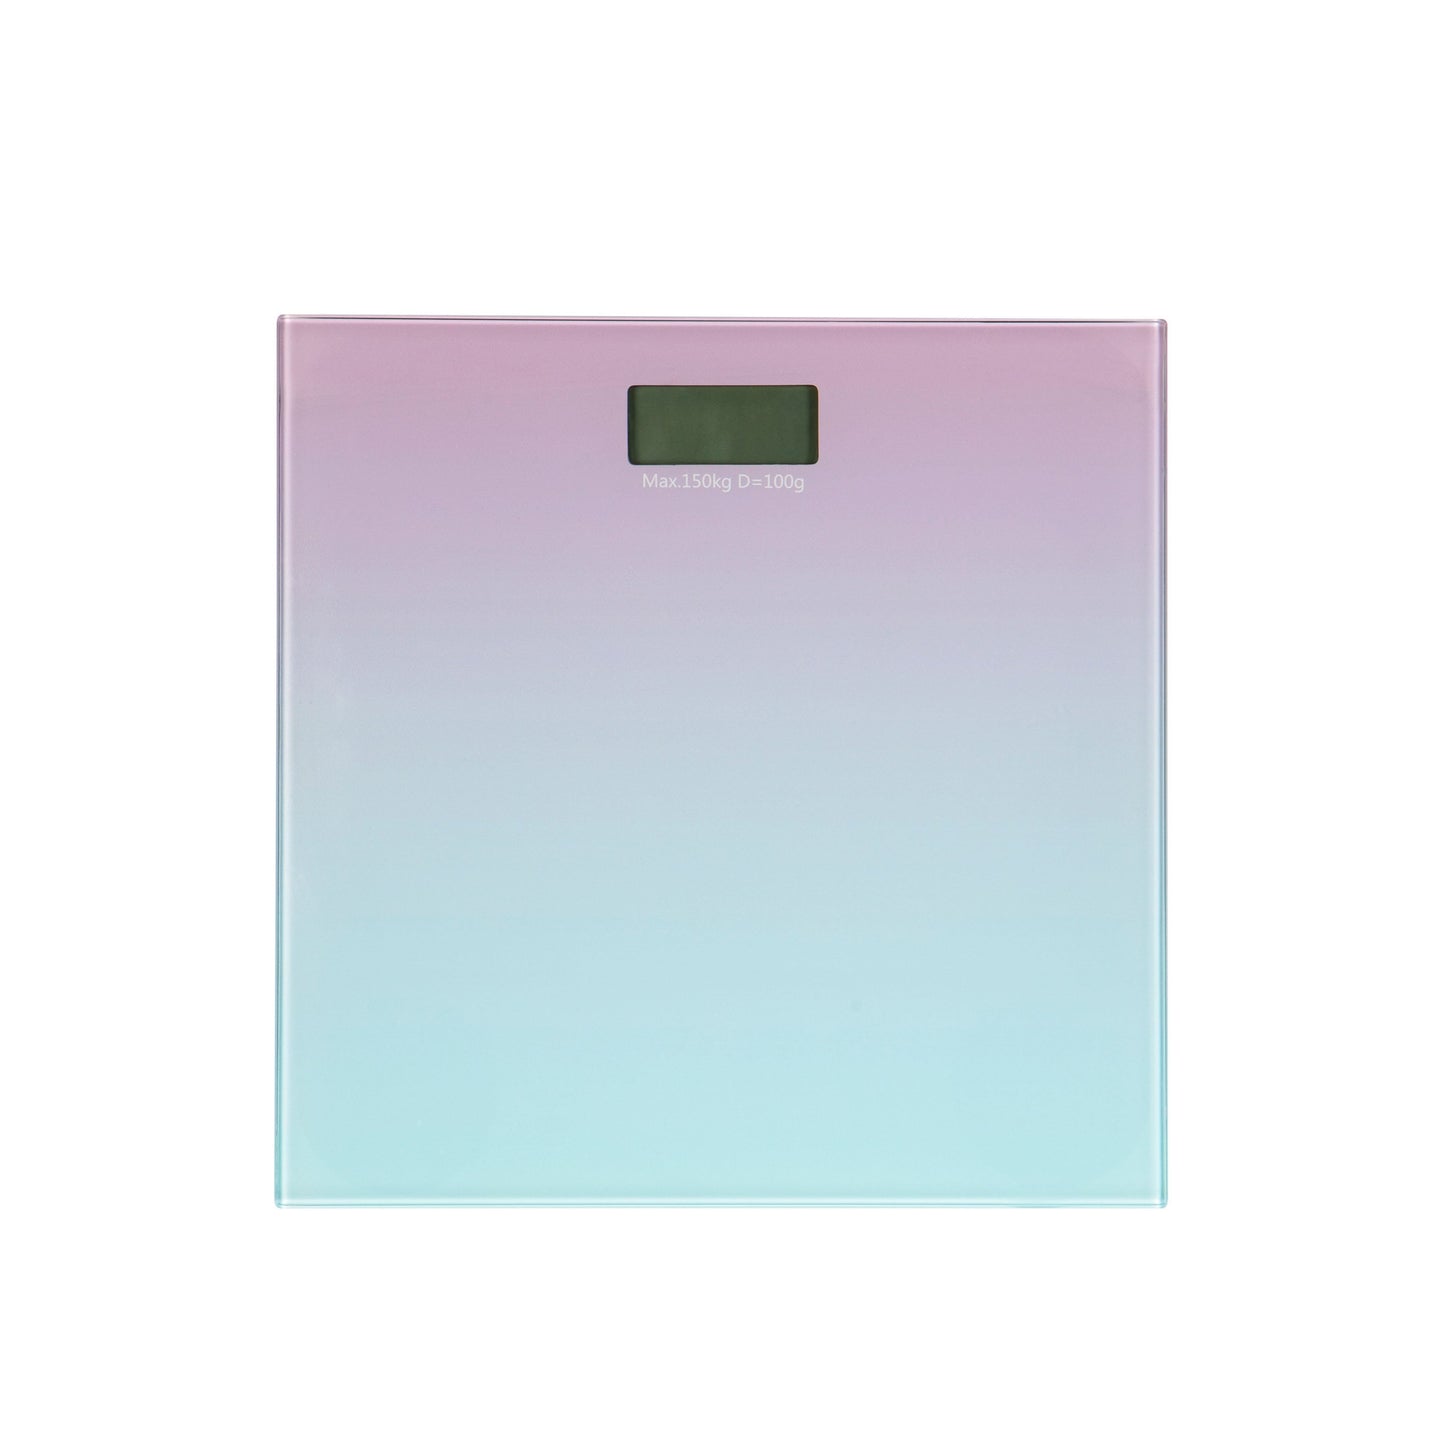 Bath Bliss Ombre Glass Digital Bathroom Scale - Battery Powered with 330 lb Capacity